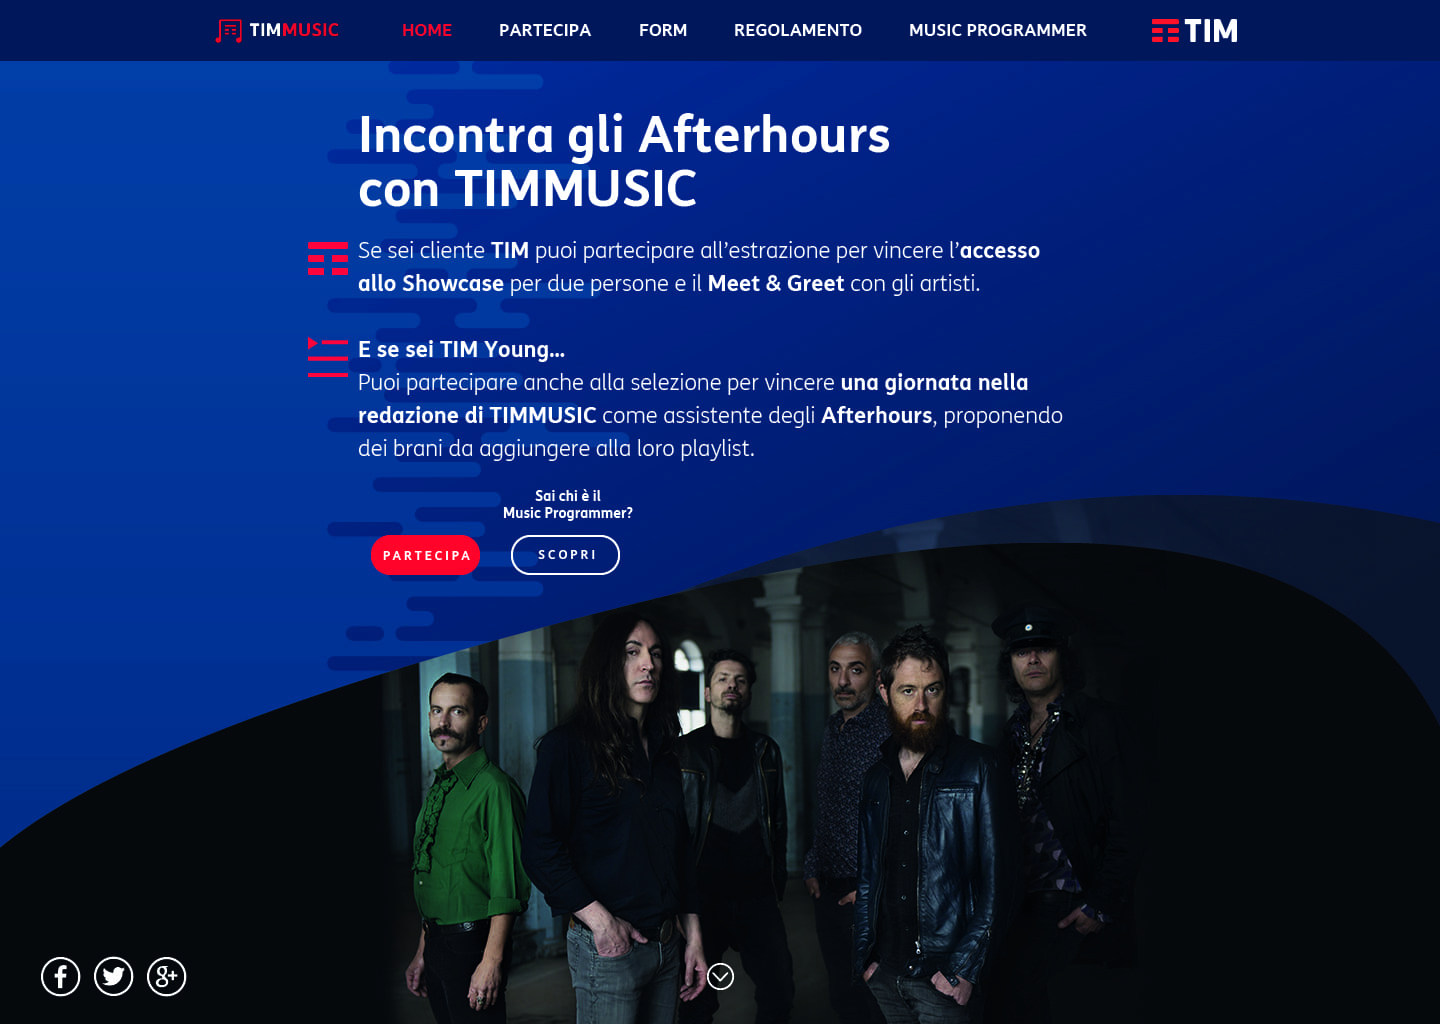 TIMMUSIC - Contest Afterhours